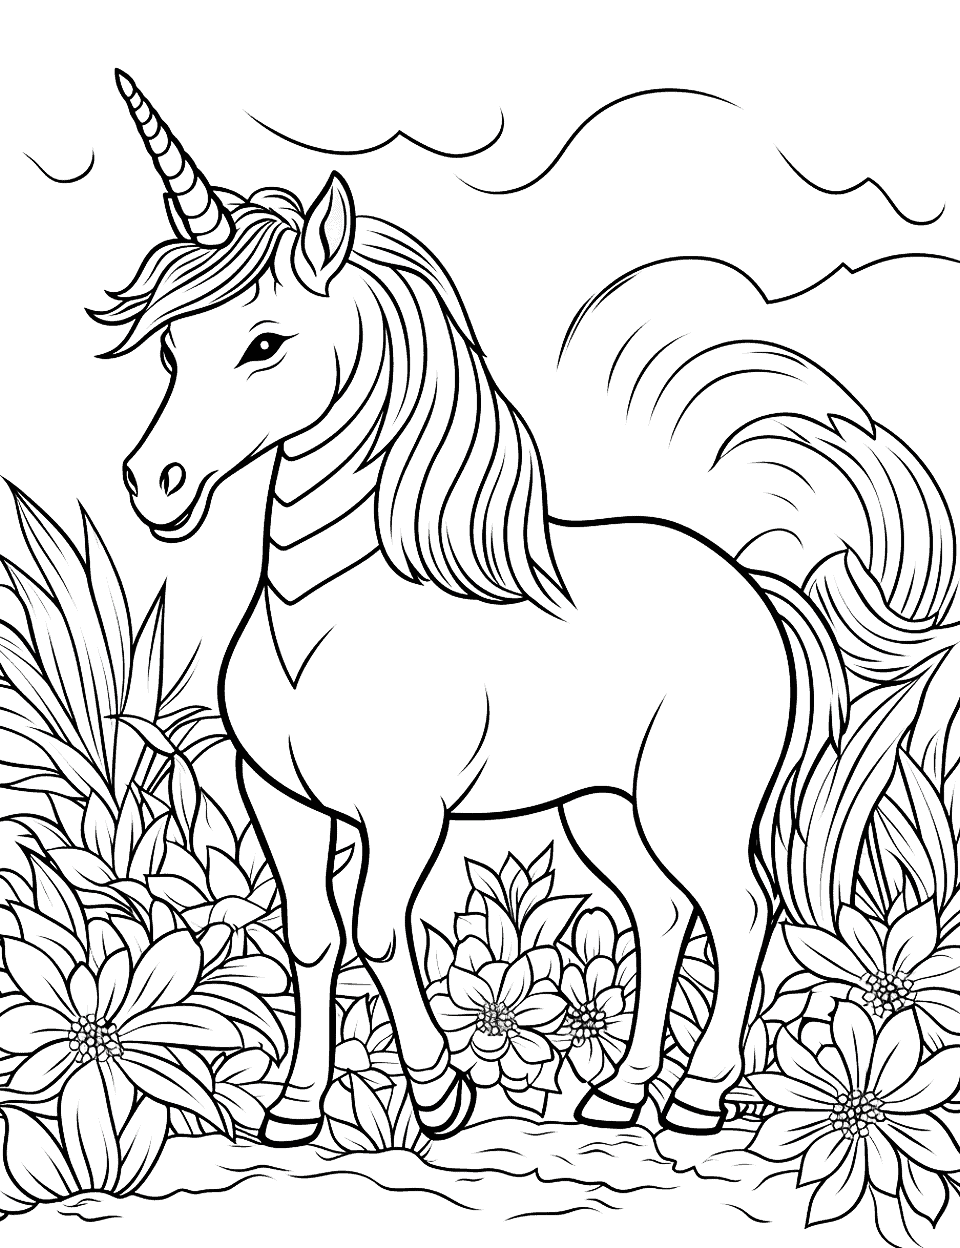 Unicorn in the Rainforest Coloring Page - A unicorn exploring a dense rainforest with various tropical plants.